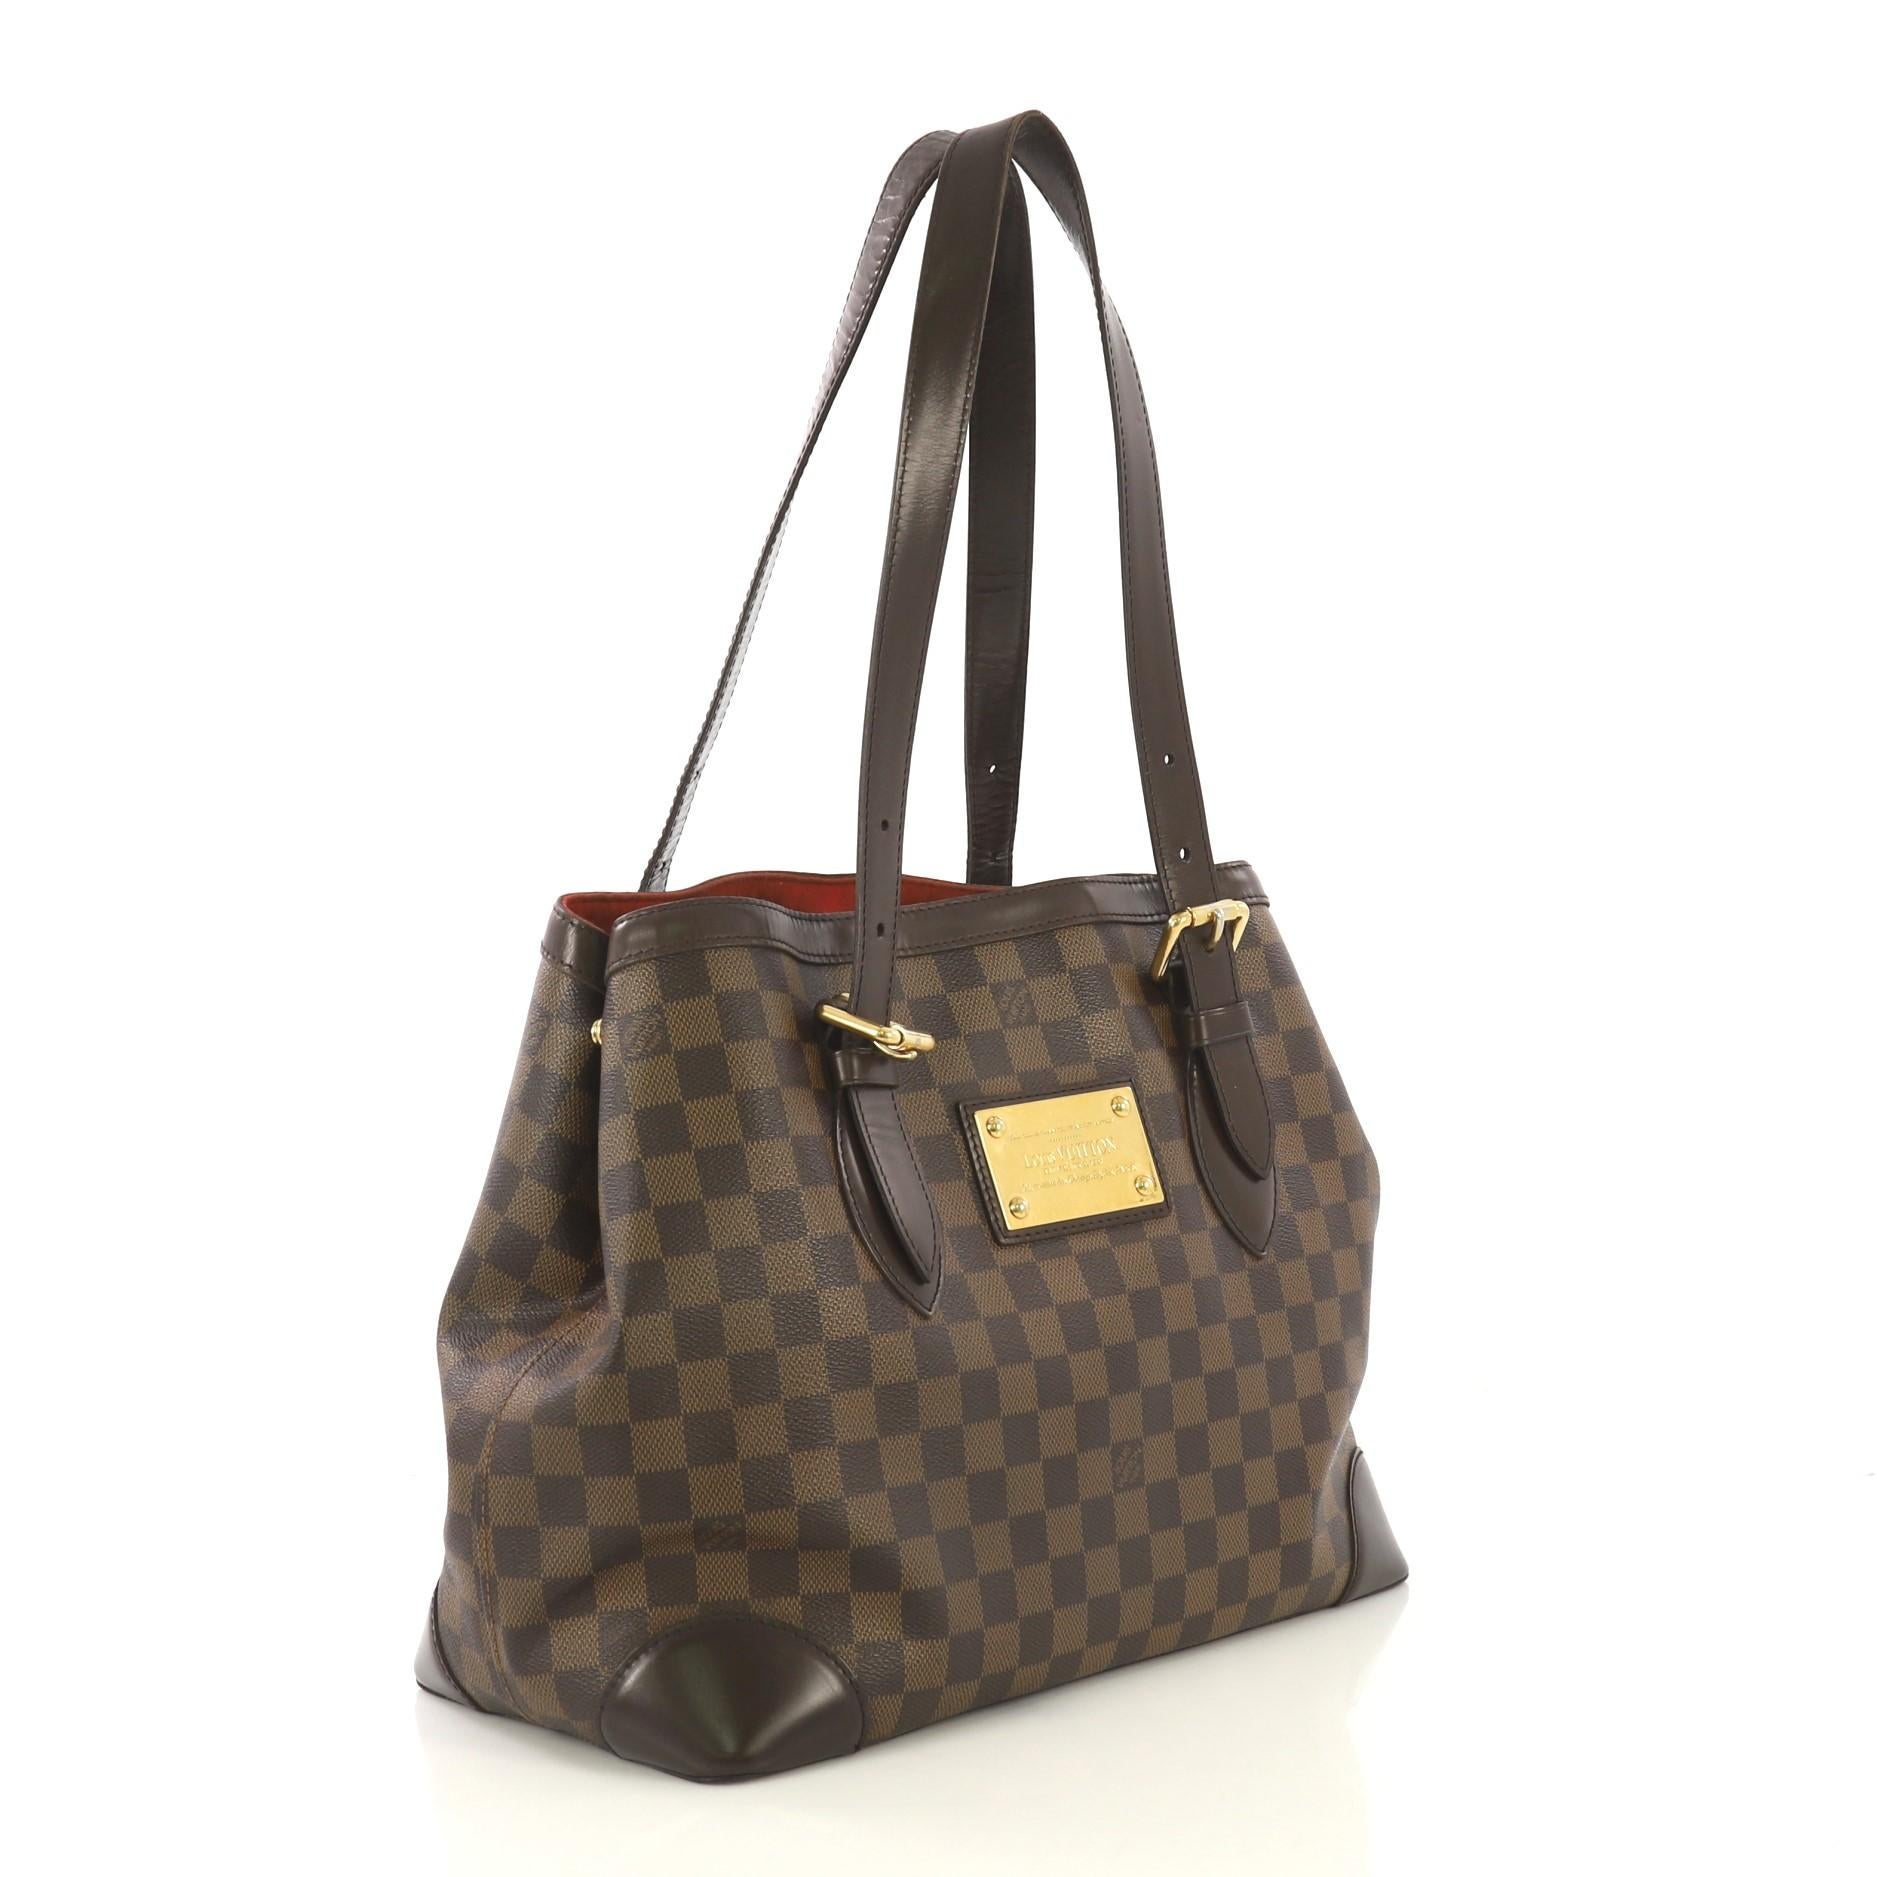 This Louis Vuitton Hampstead Handbag Damier MM, crafted from damier ebene coated canvas, features dual flat handles, leather trim, side snap closures, metal logo plate, and gold-tone hardware. Its clasp closure opens to a red microfiber interior